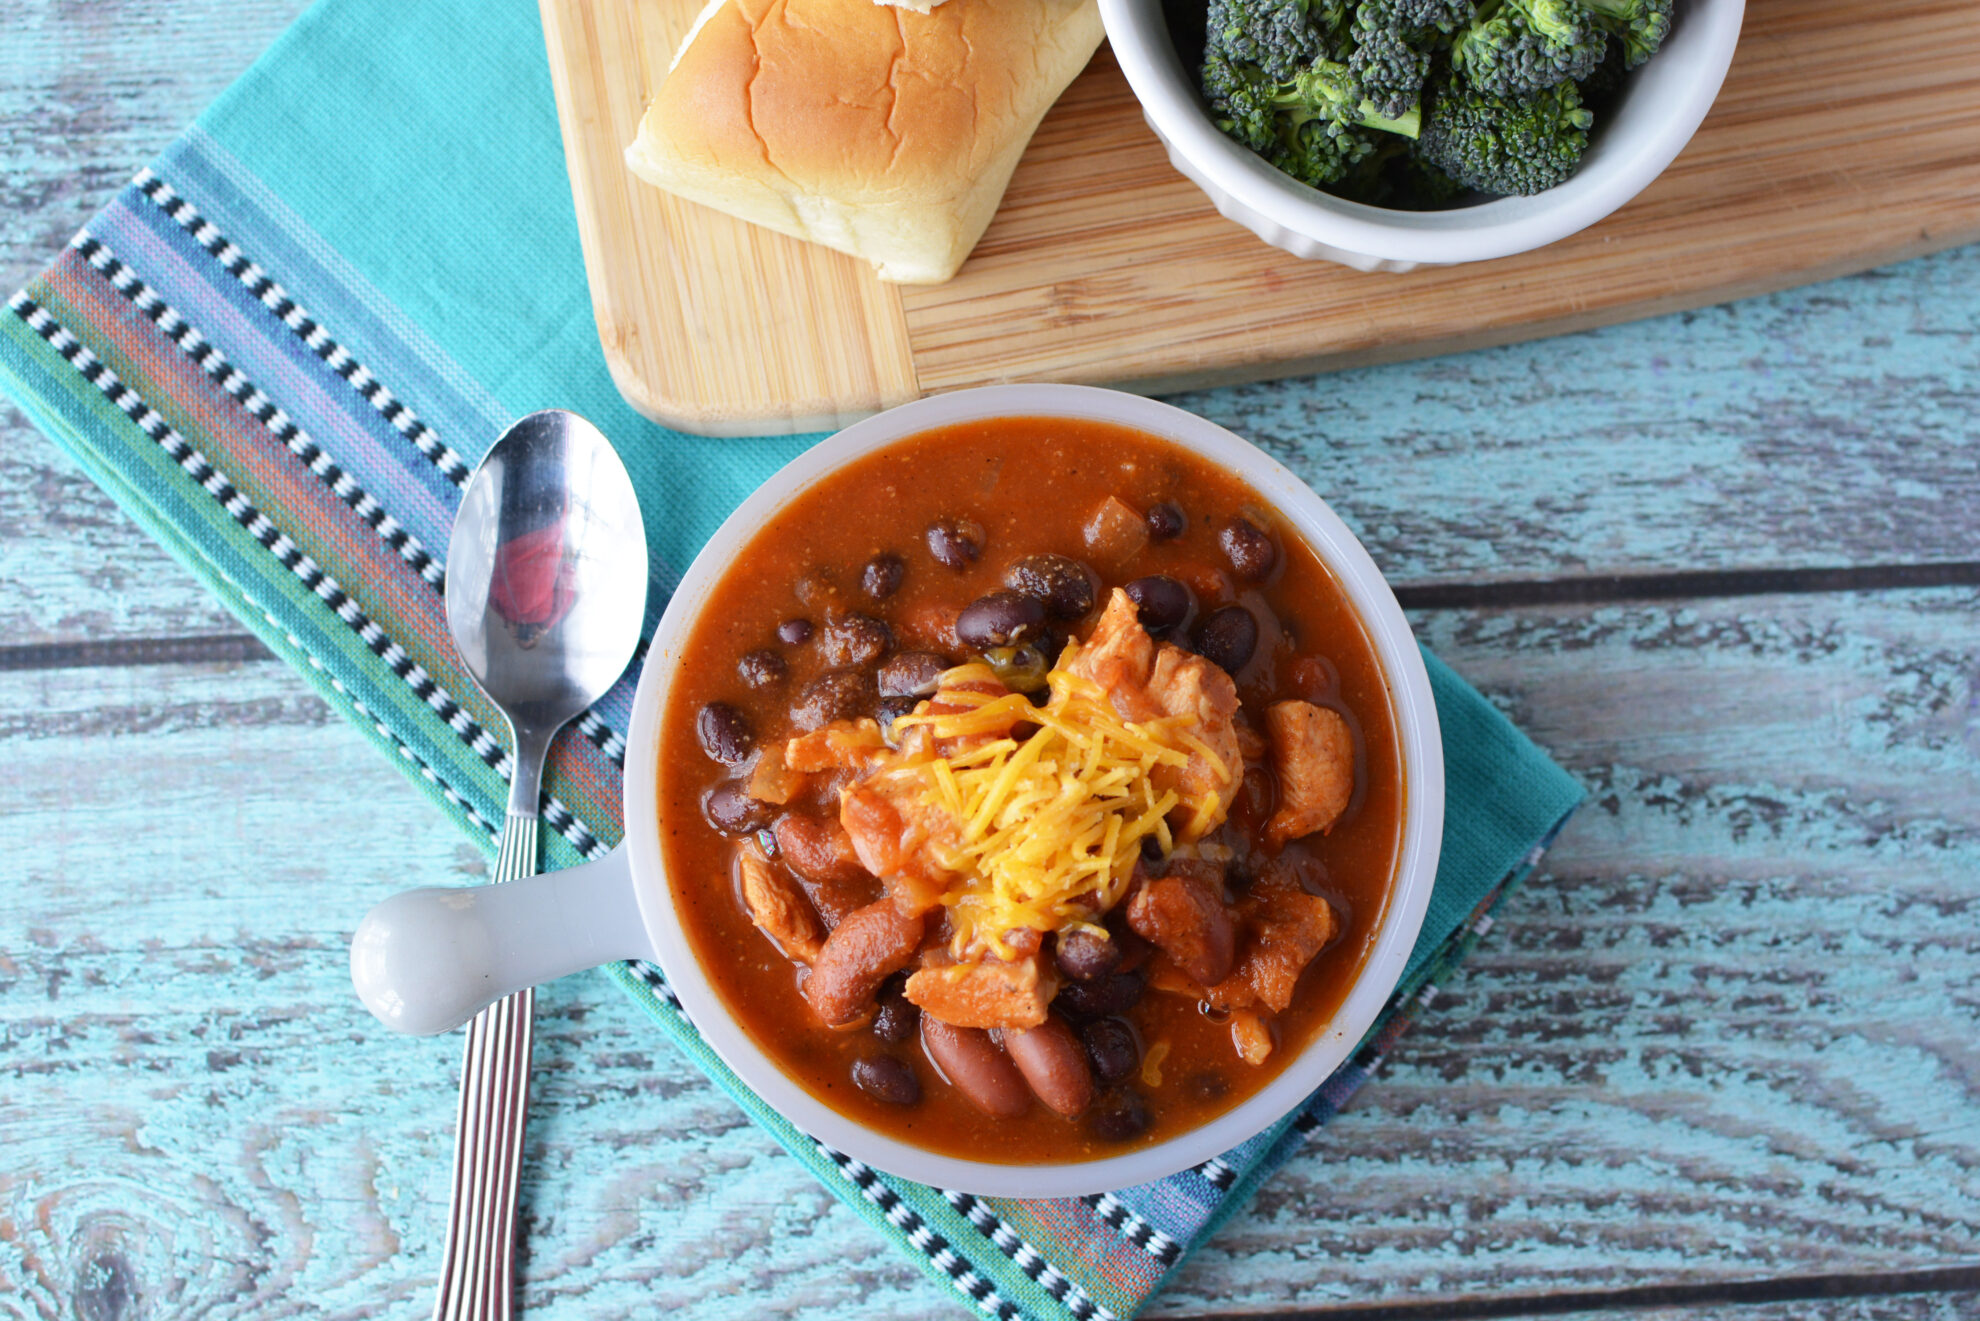 You'll fall in love with this rustic slow cooker dish, Slow Cooker Cowboy Chili. Easy and feeds a crowd! Find this delicious recipe on 5 Dollar Dinners!